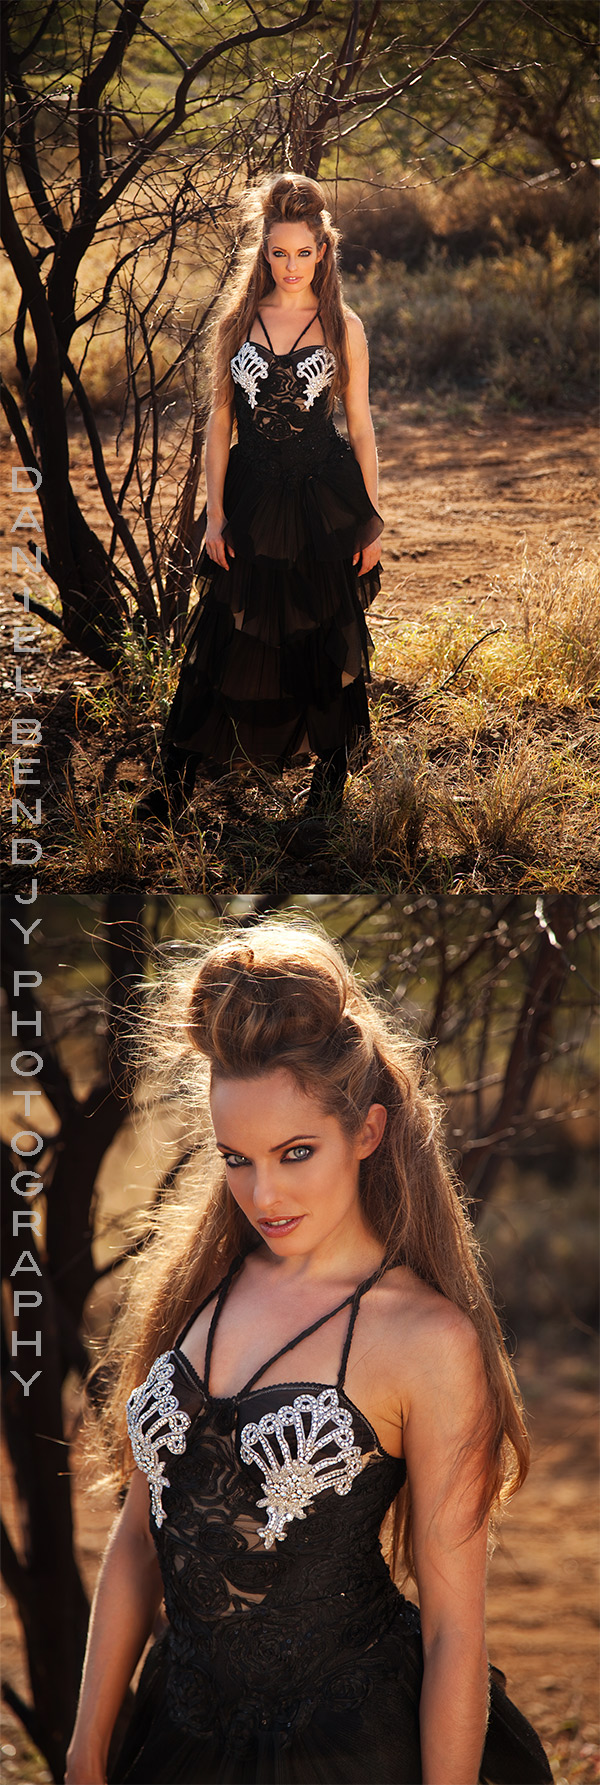 Female model photo shoot of Cacdemode by Daniel Bendjy in Maui, clothing designed by Cacdemode